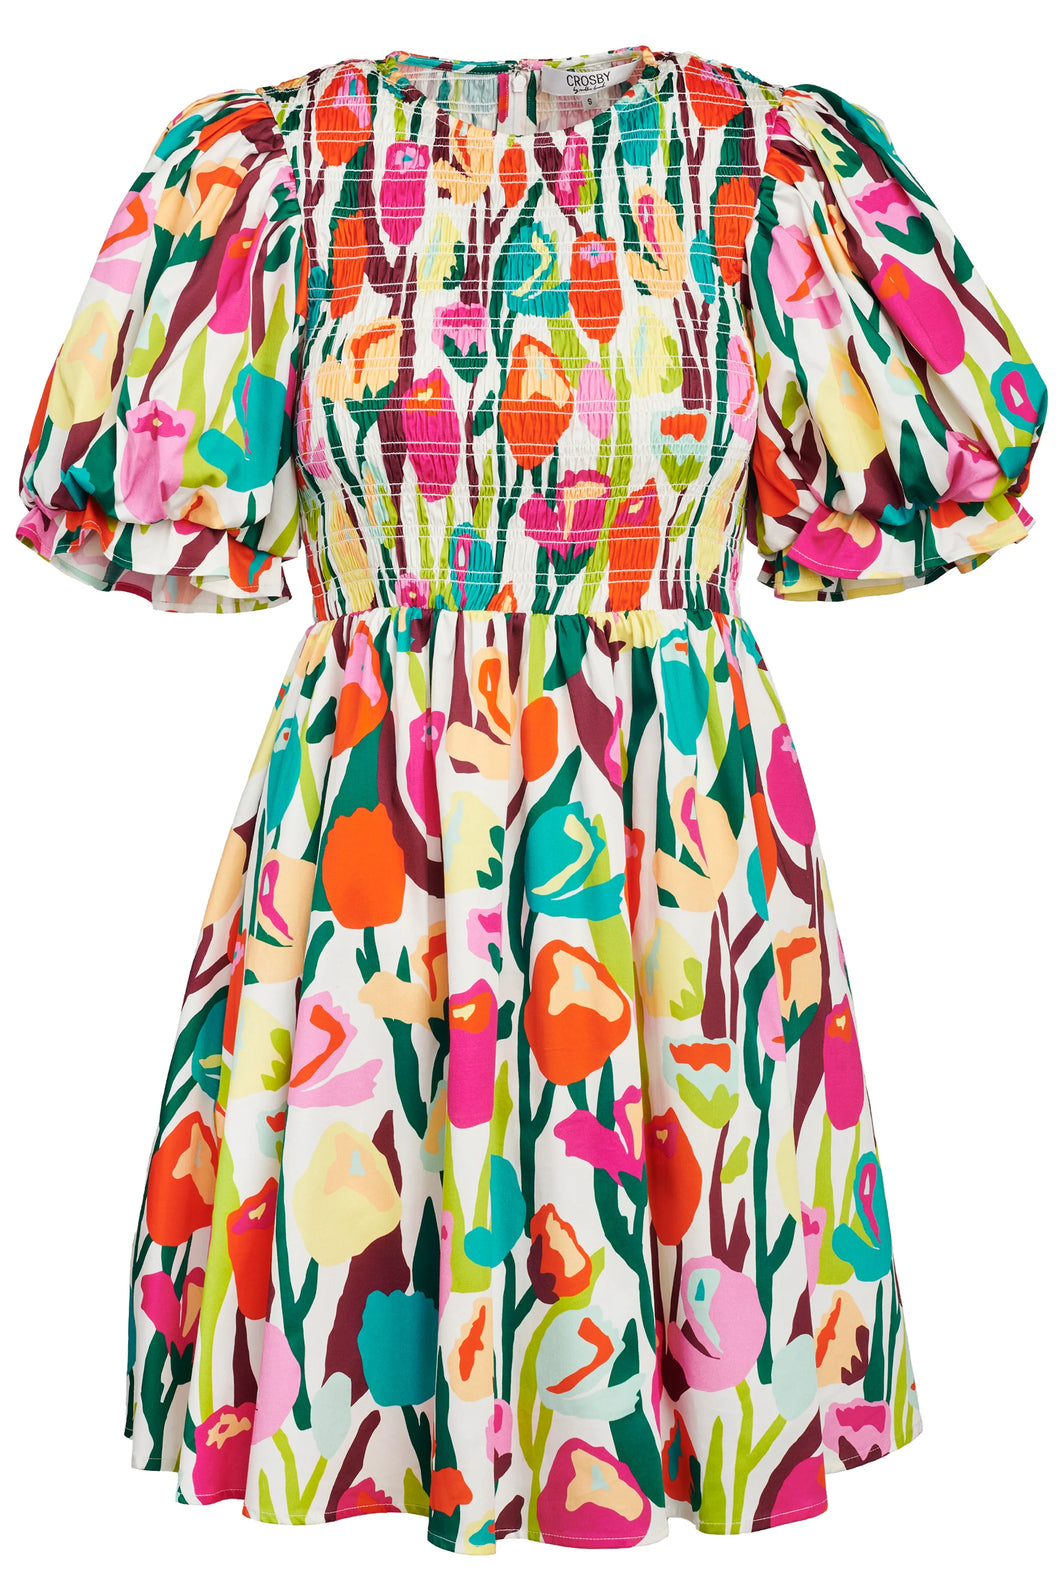 Lizzy Bright Tulips Puff Sleeve Smocked Dress